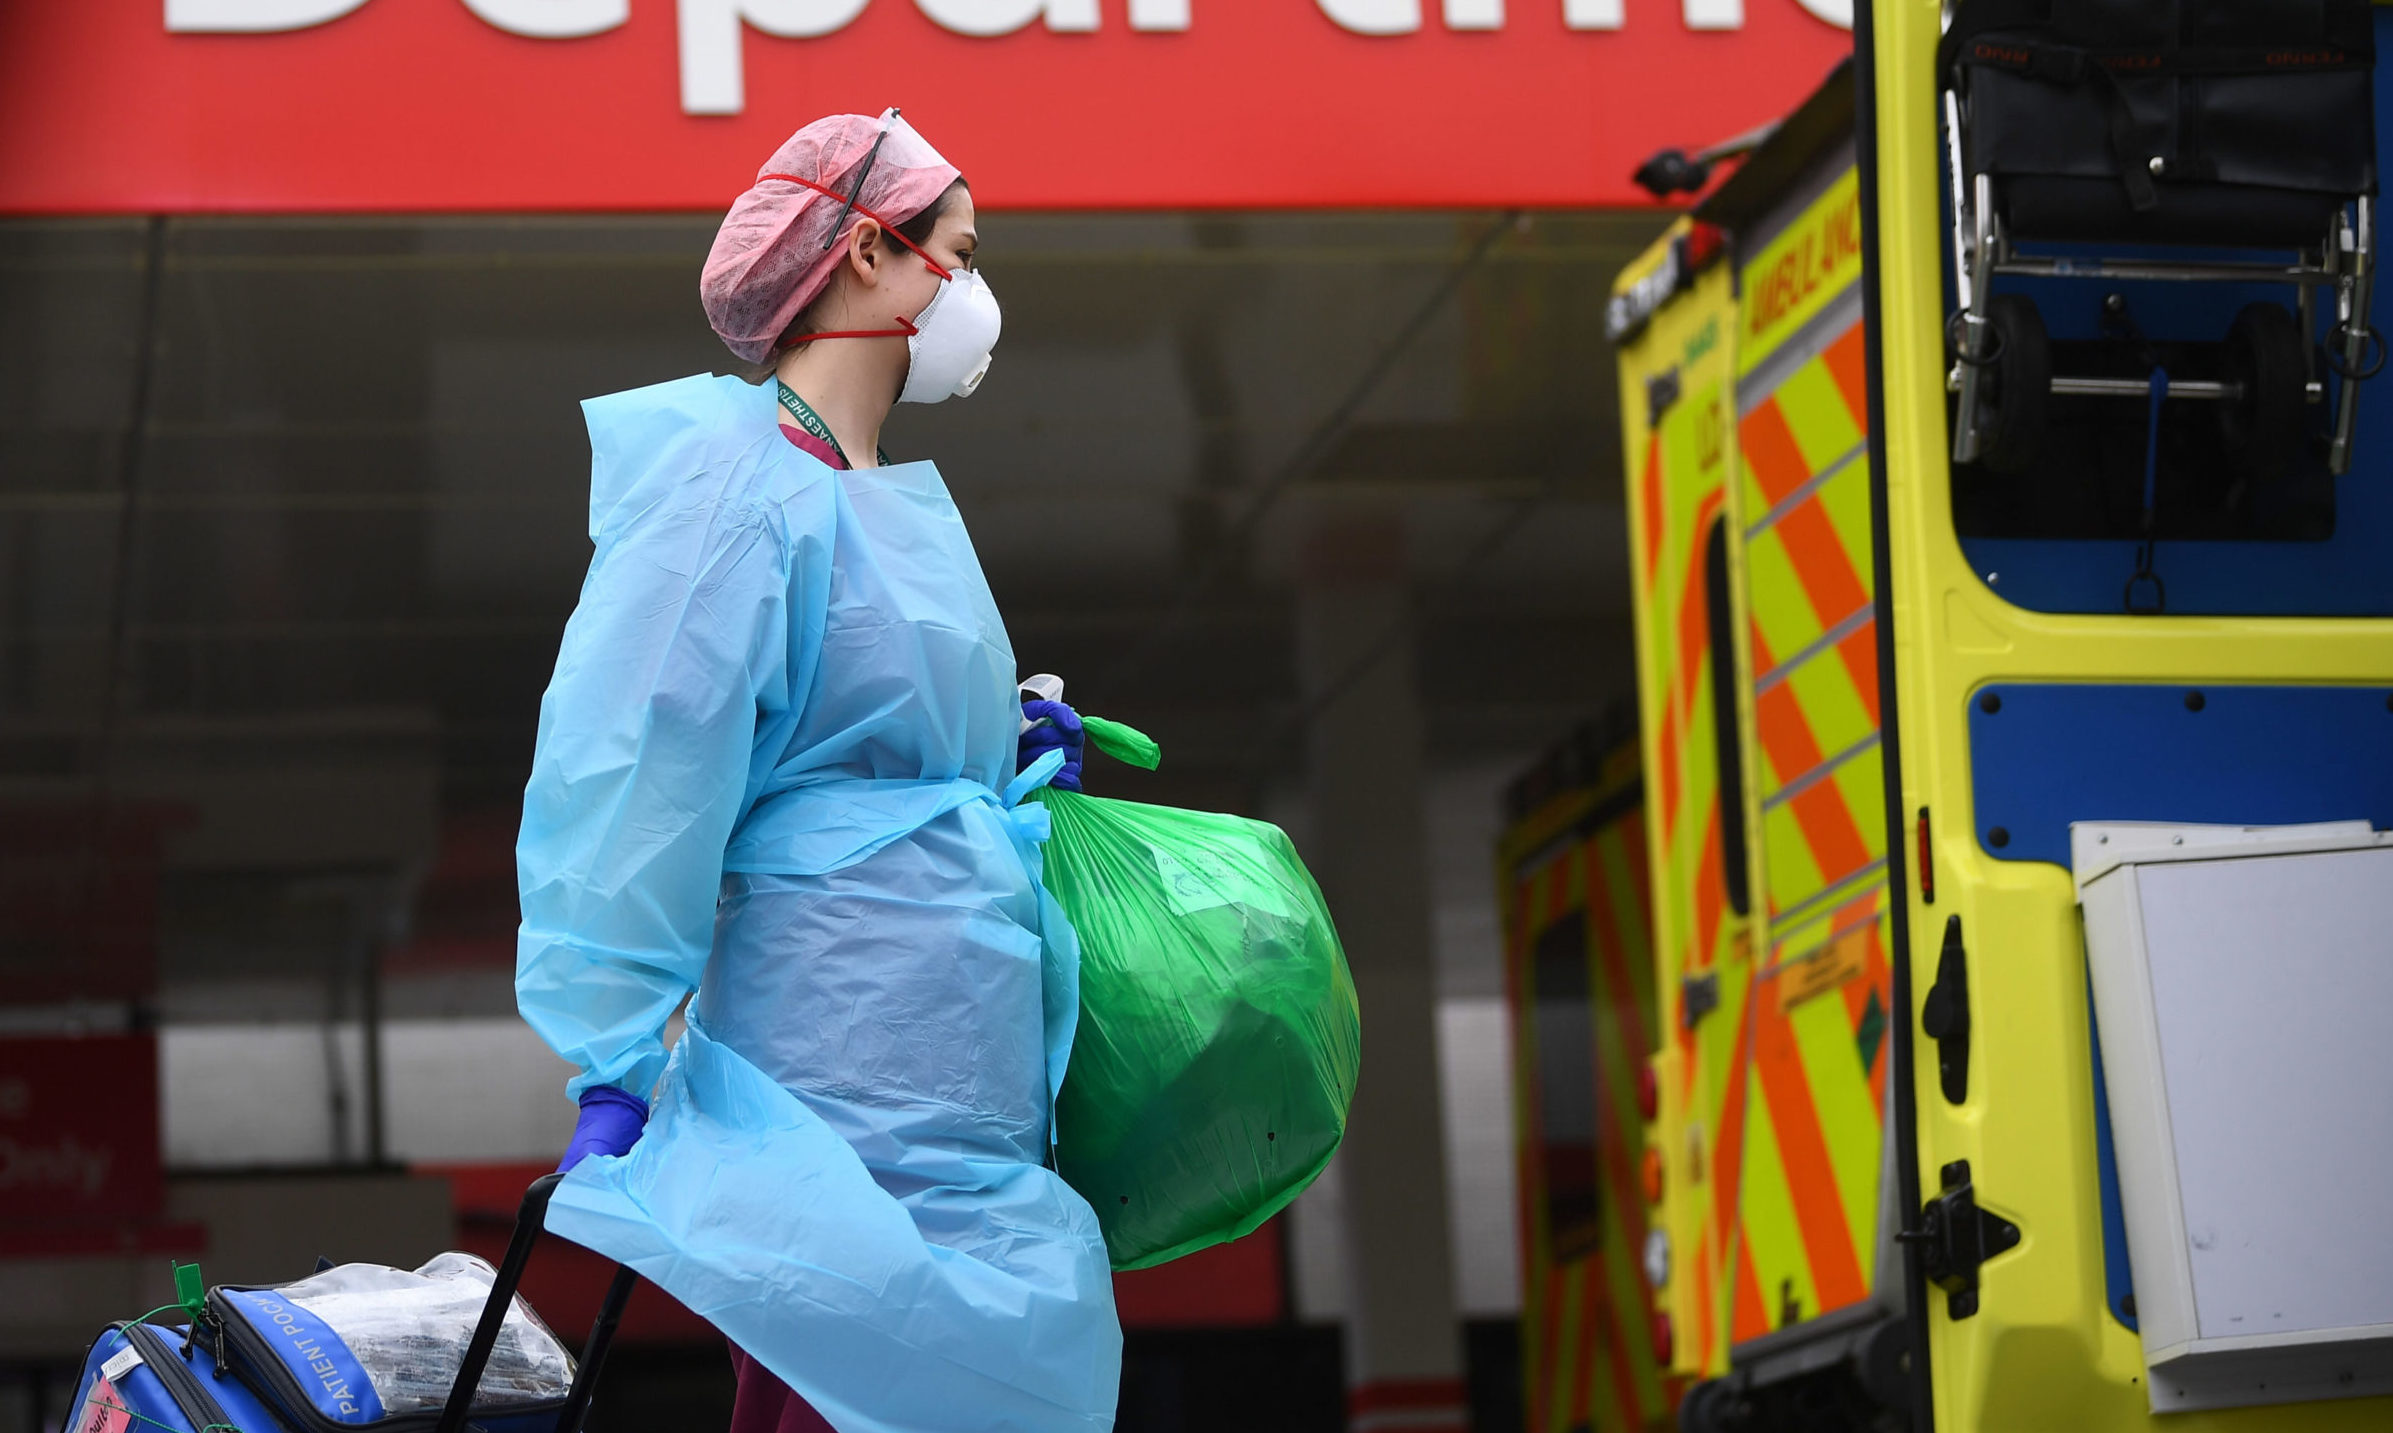 A member of hospital staff wearing personal protective equipment (PPE) outside St Thomas' Hospital in Westminster, London as the UK continues in lockdown to help curb the spread of the coronavirus.